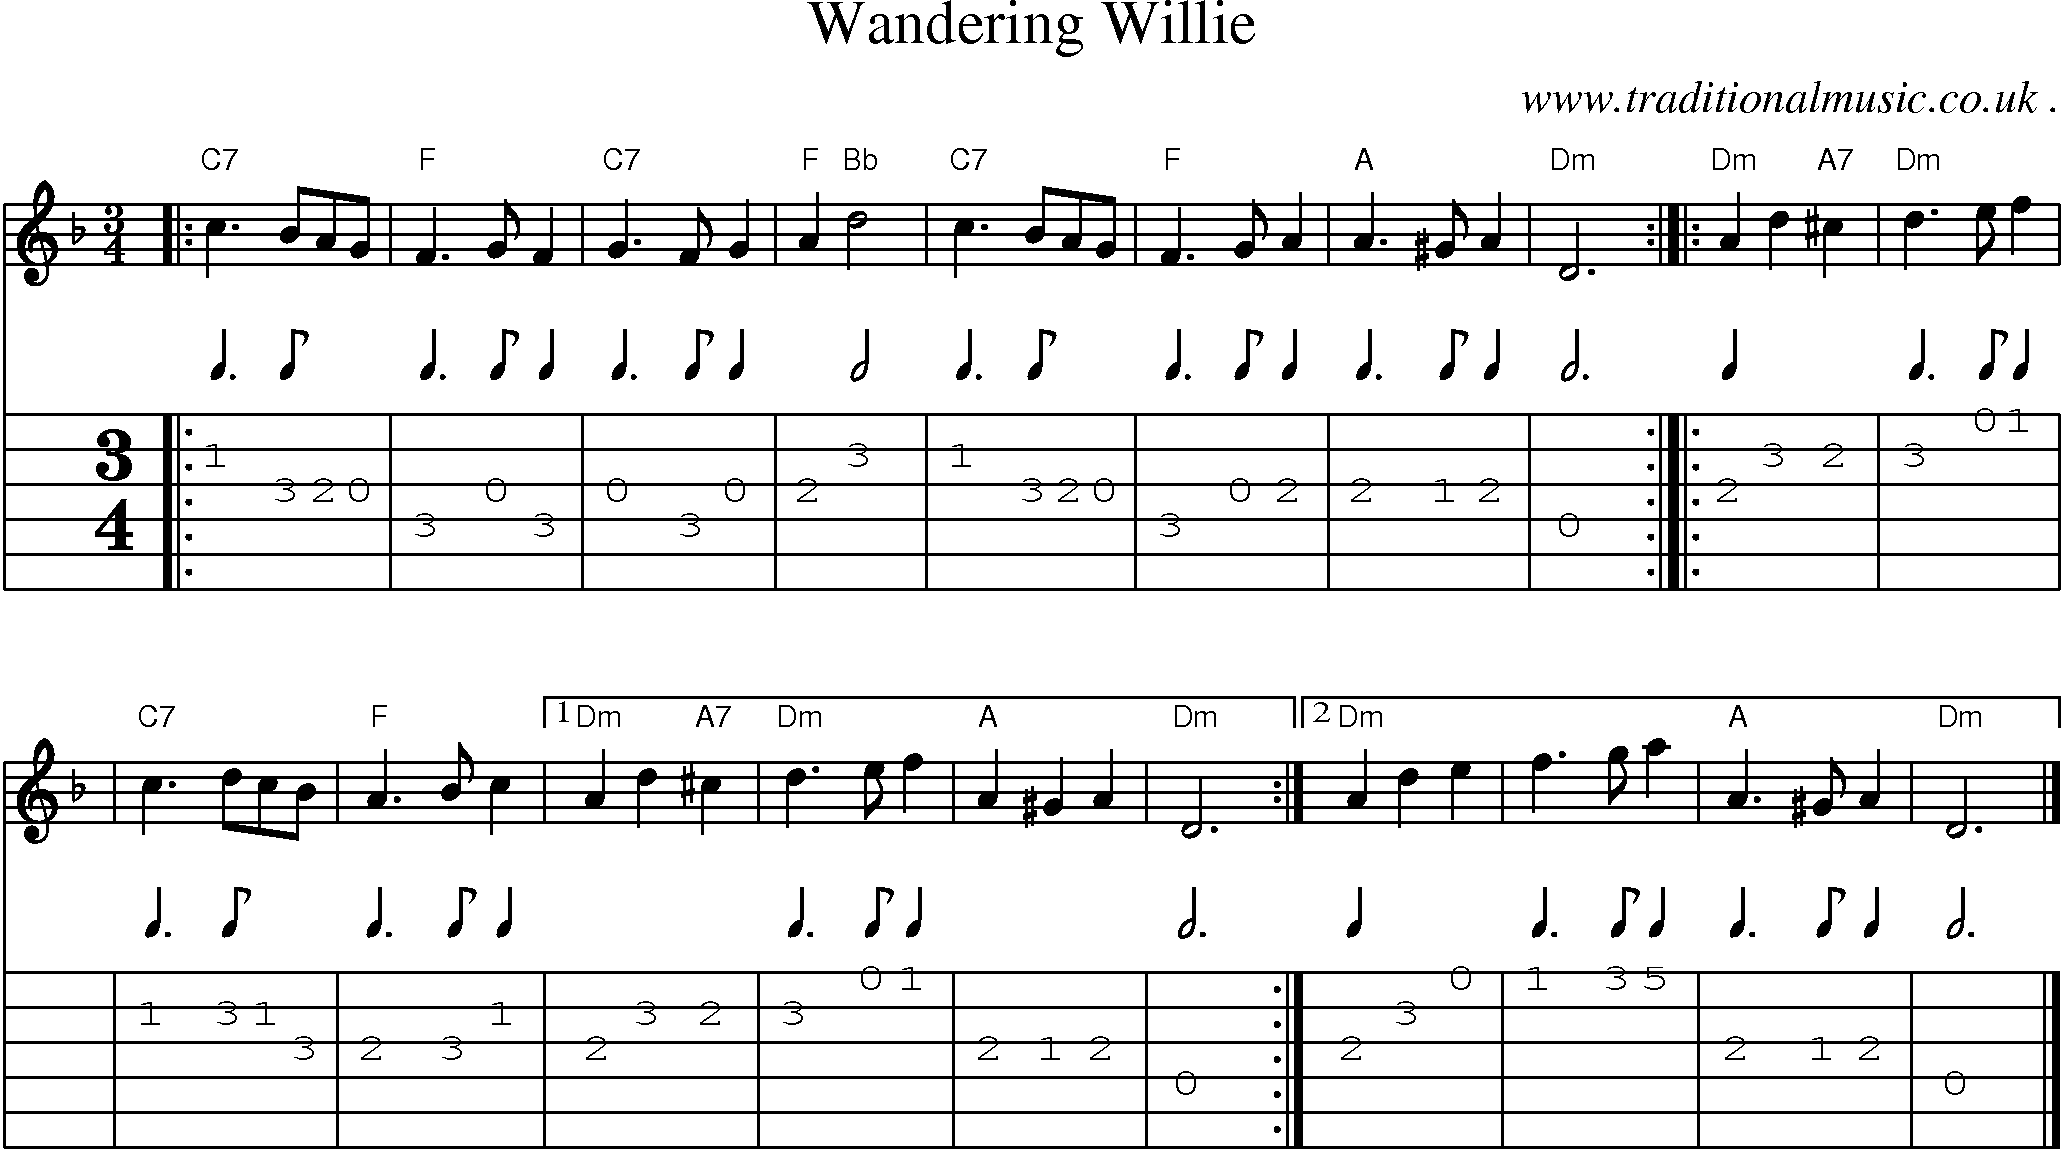 Sheet-music  score, Chords and Guitar Tabs for Wandering Willie